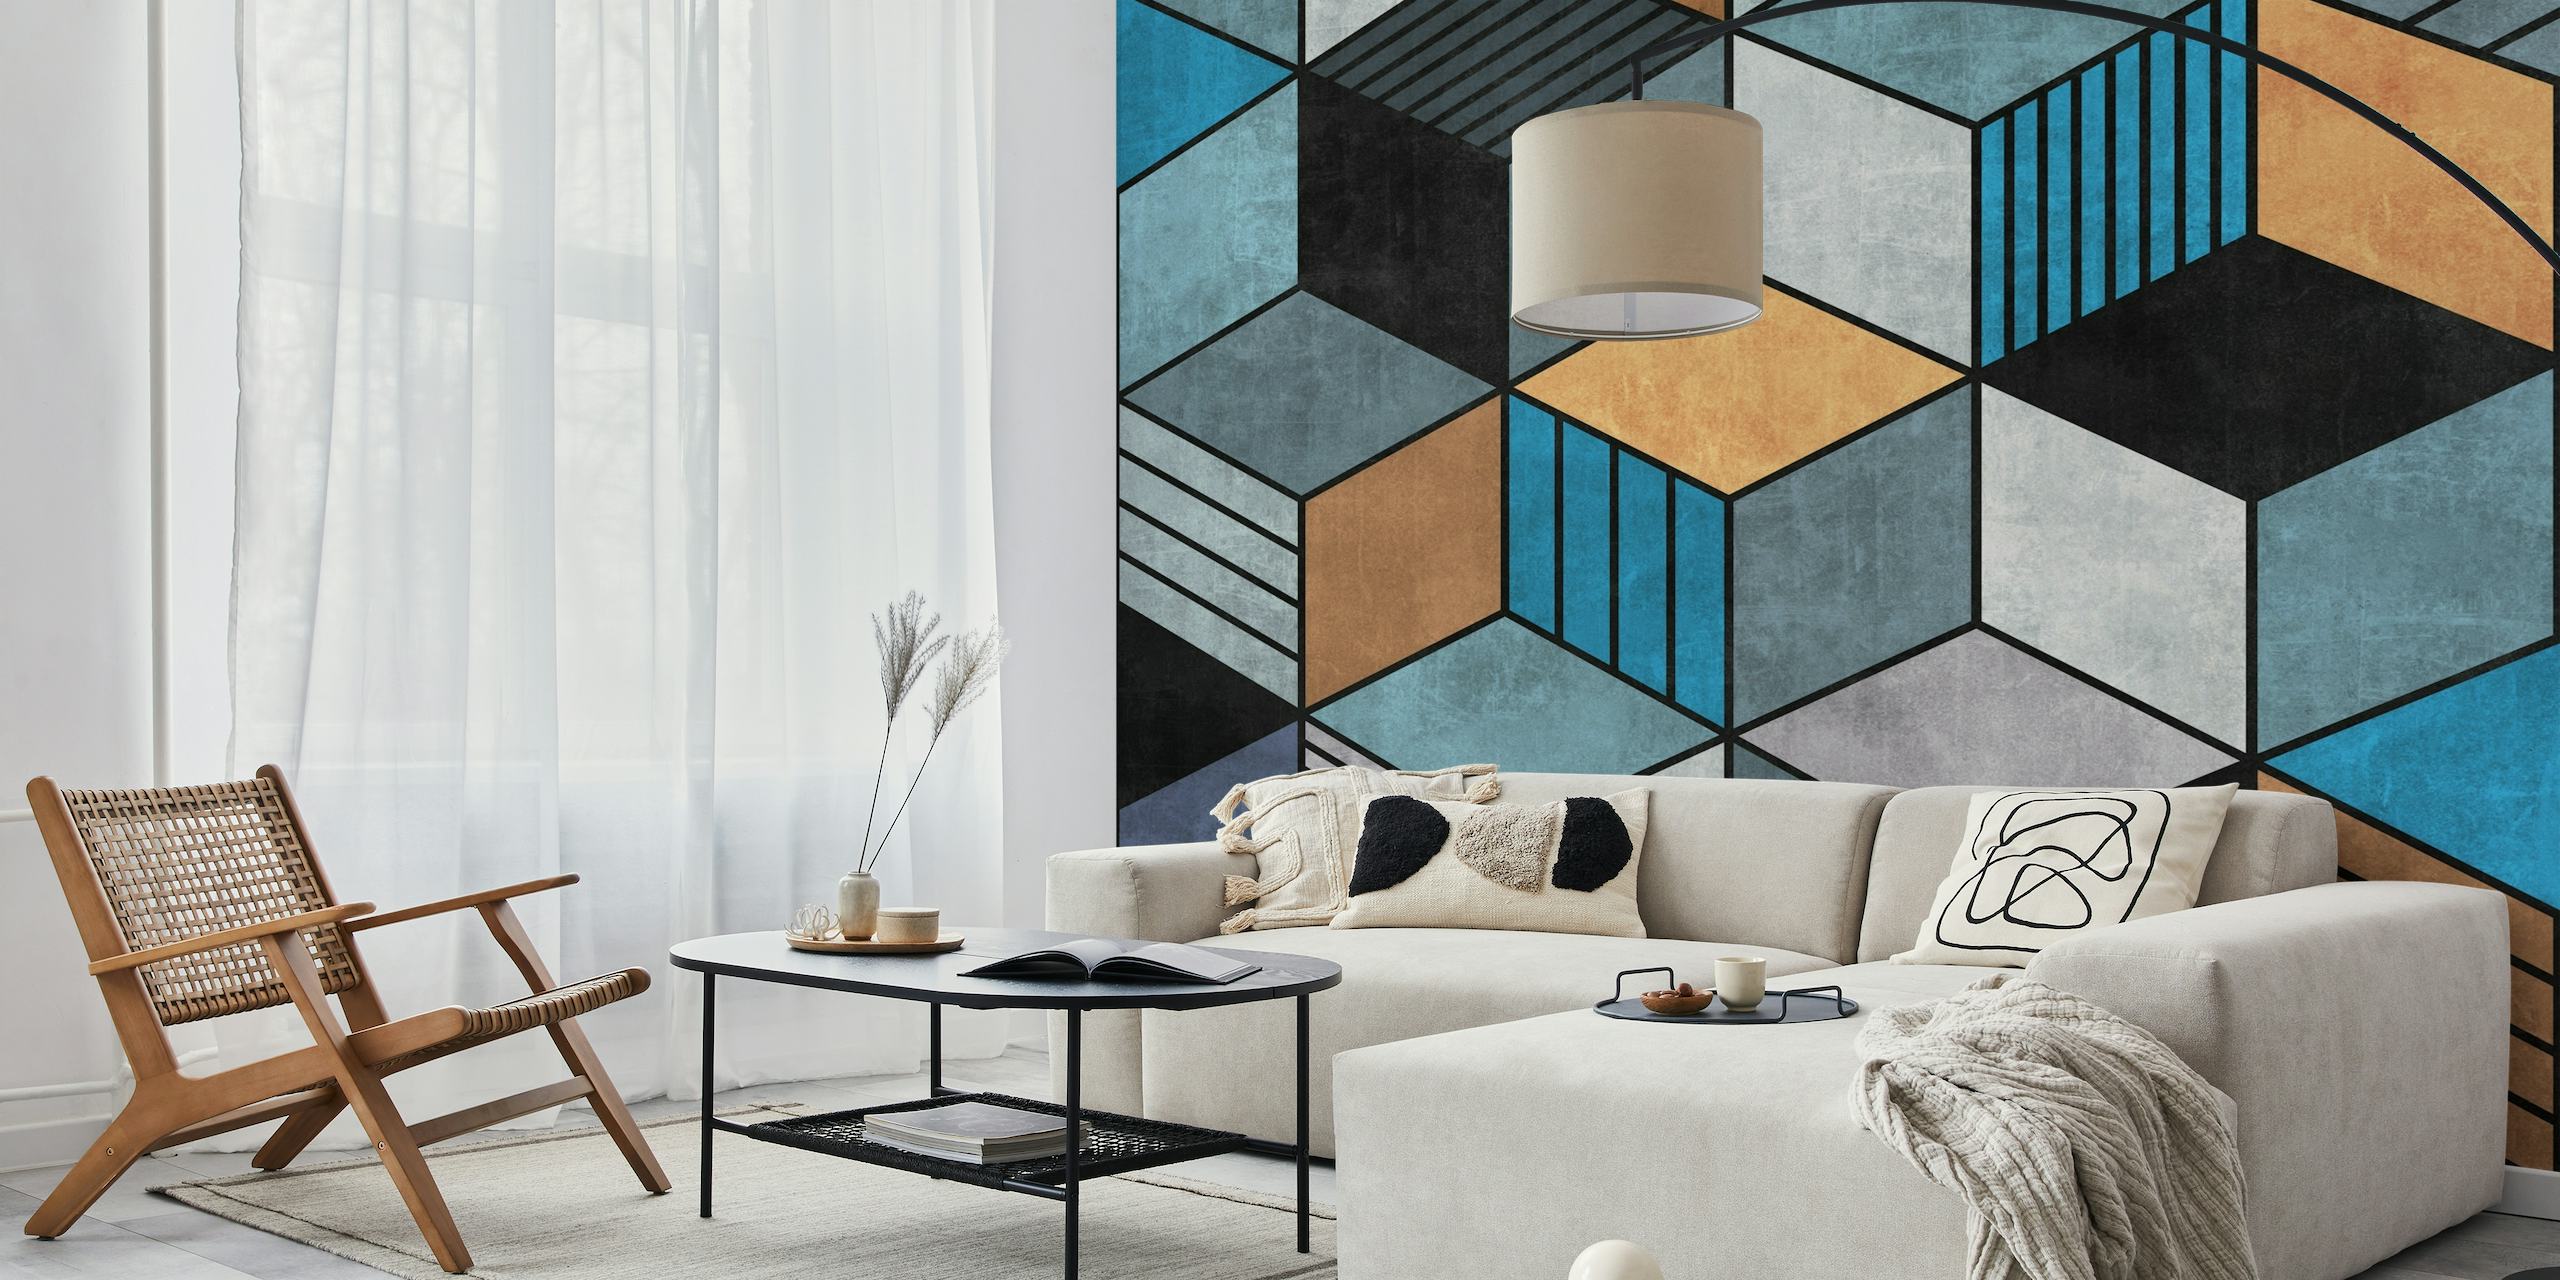 Abstract geometric wall mural with colorful cubes in shades of blue, black, and earth tones creating a 3D effect